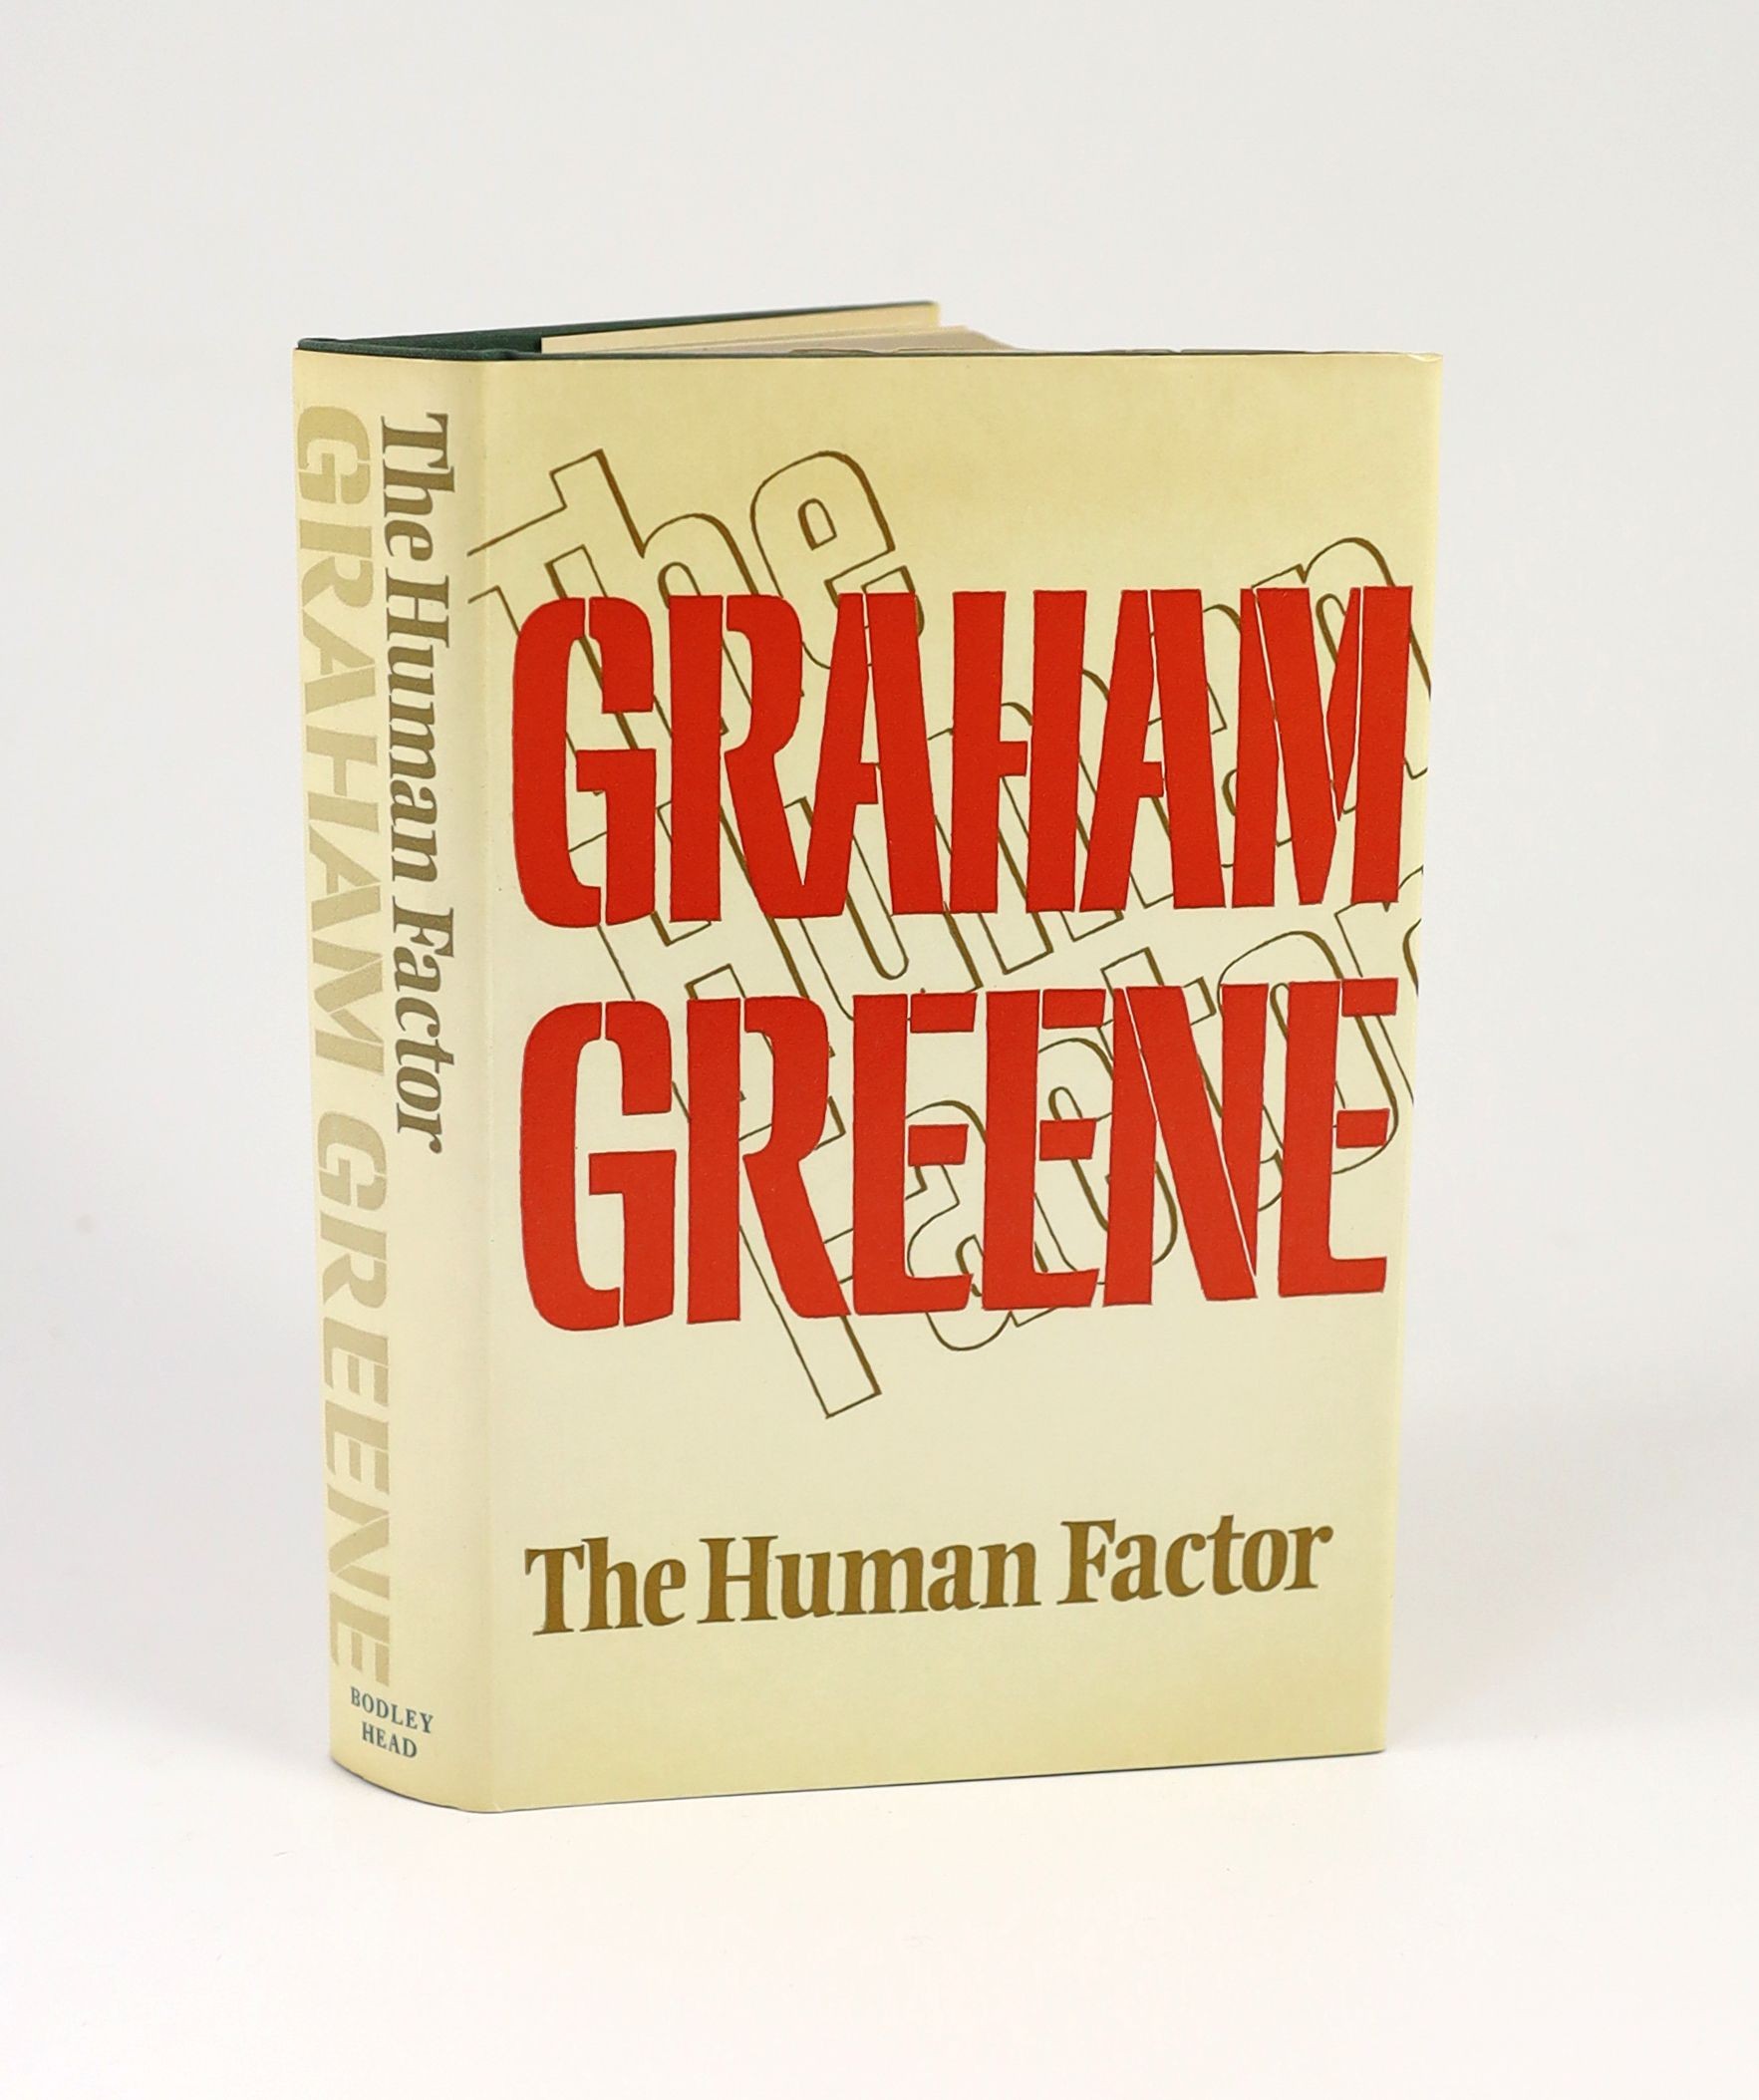 Greene, Graham - The Human Factor, 1st edition, second state, in unclipped d/j, The Bodley Head, London, 1978